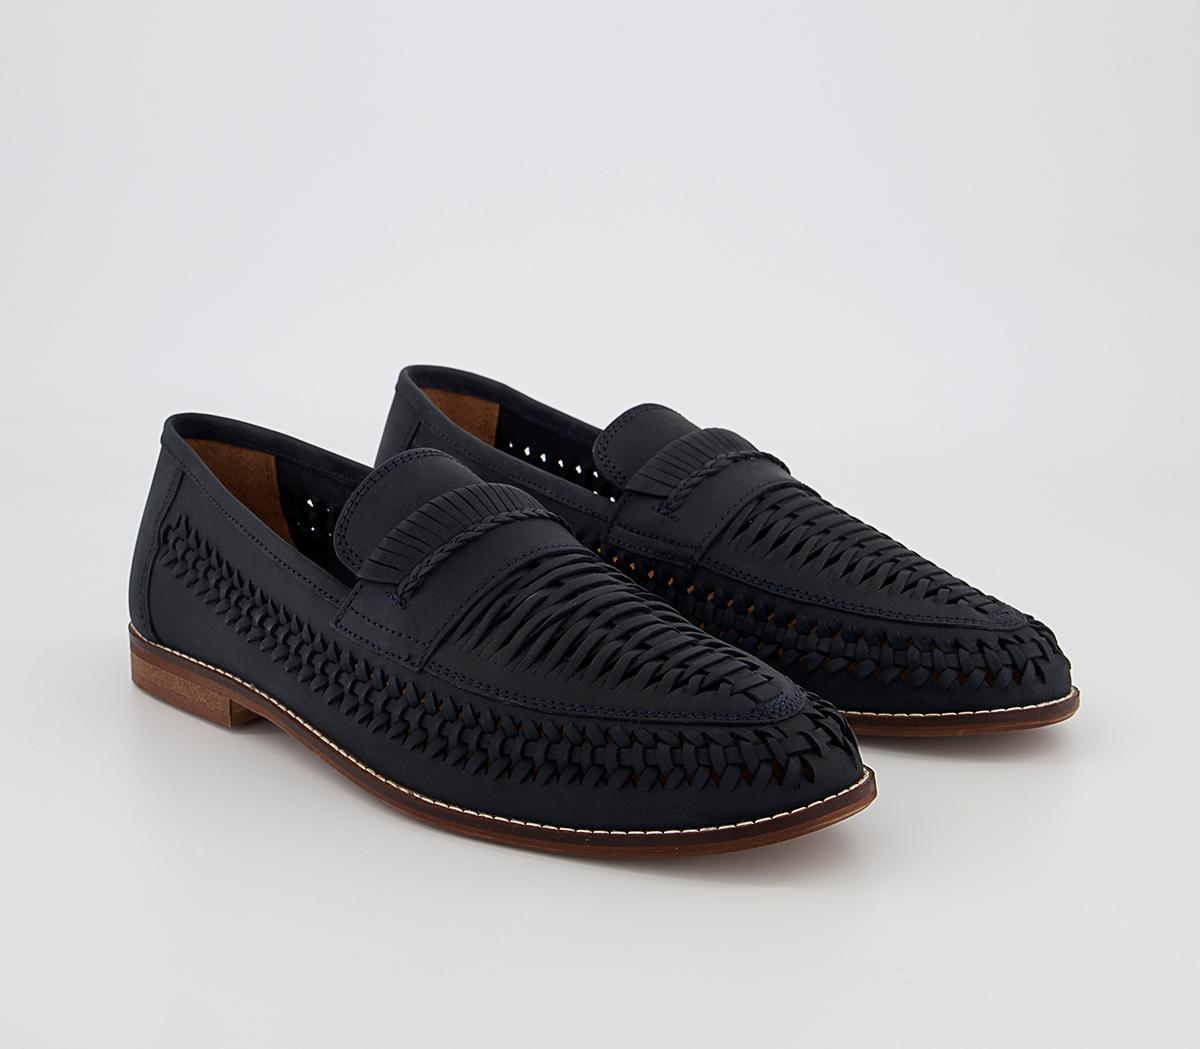 Office Chiswick Woven Saddle Slip On Loafers Navy Nubuck - Men's Casual ...